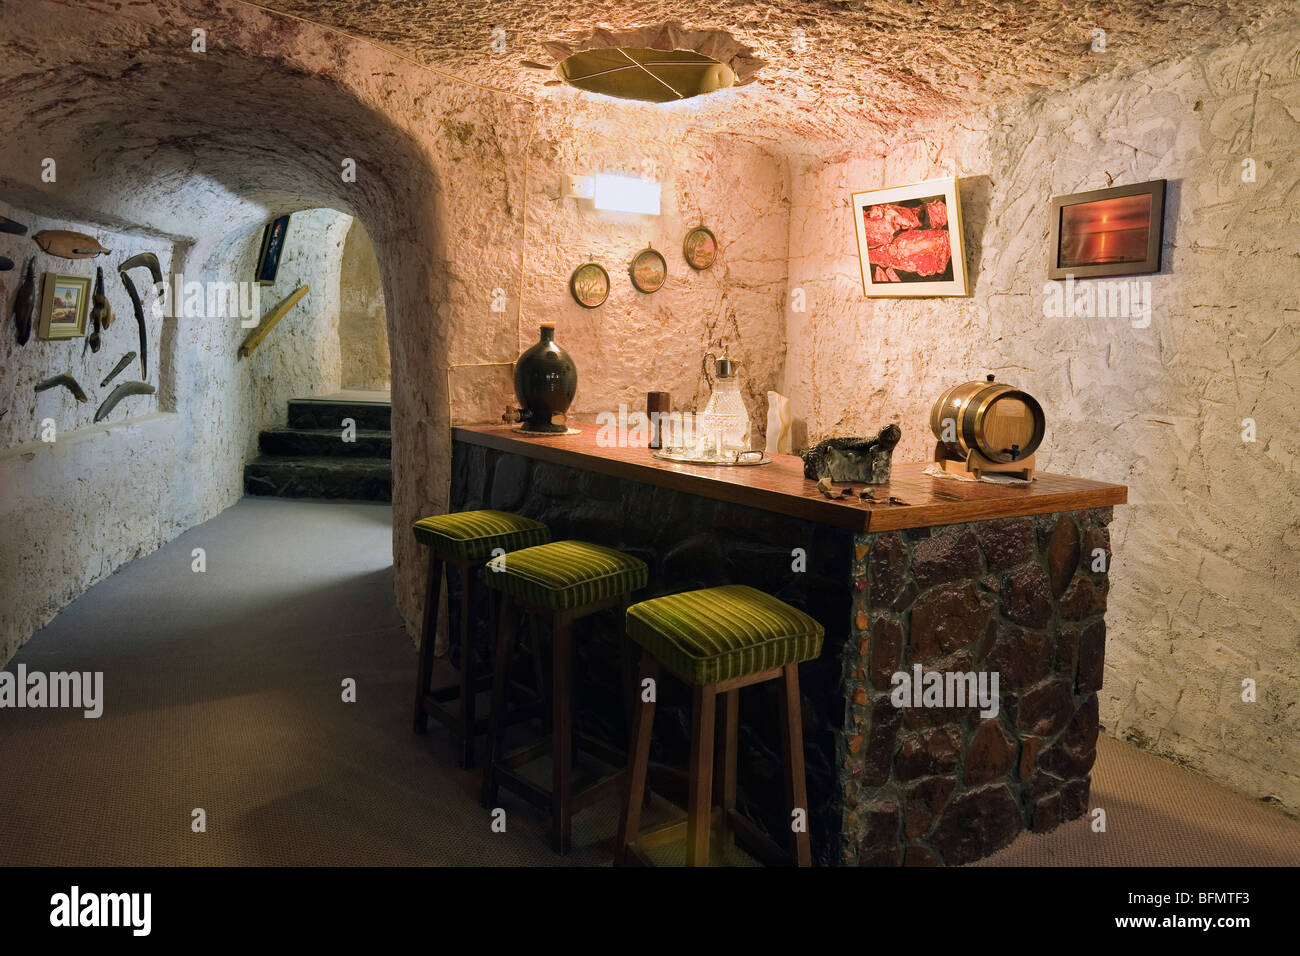 Australia, South Australia, Coober Pedy. Bar in Faye's underground home, built by 3 women in the 1960s using pick and shovel. Stock Photo